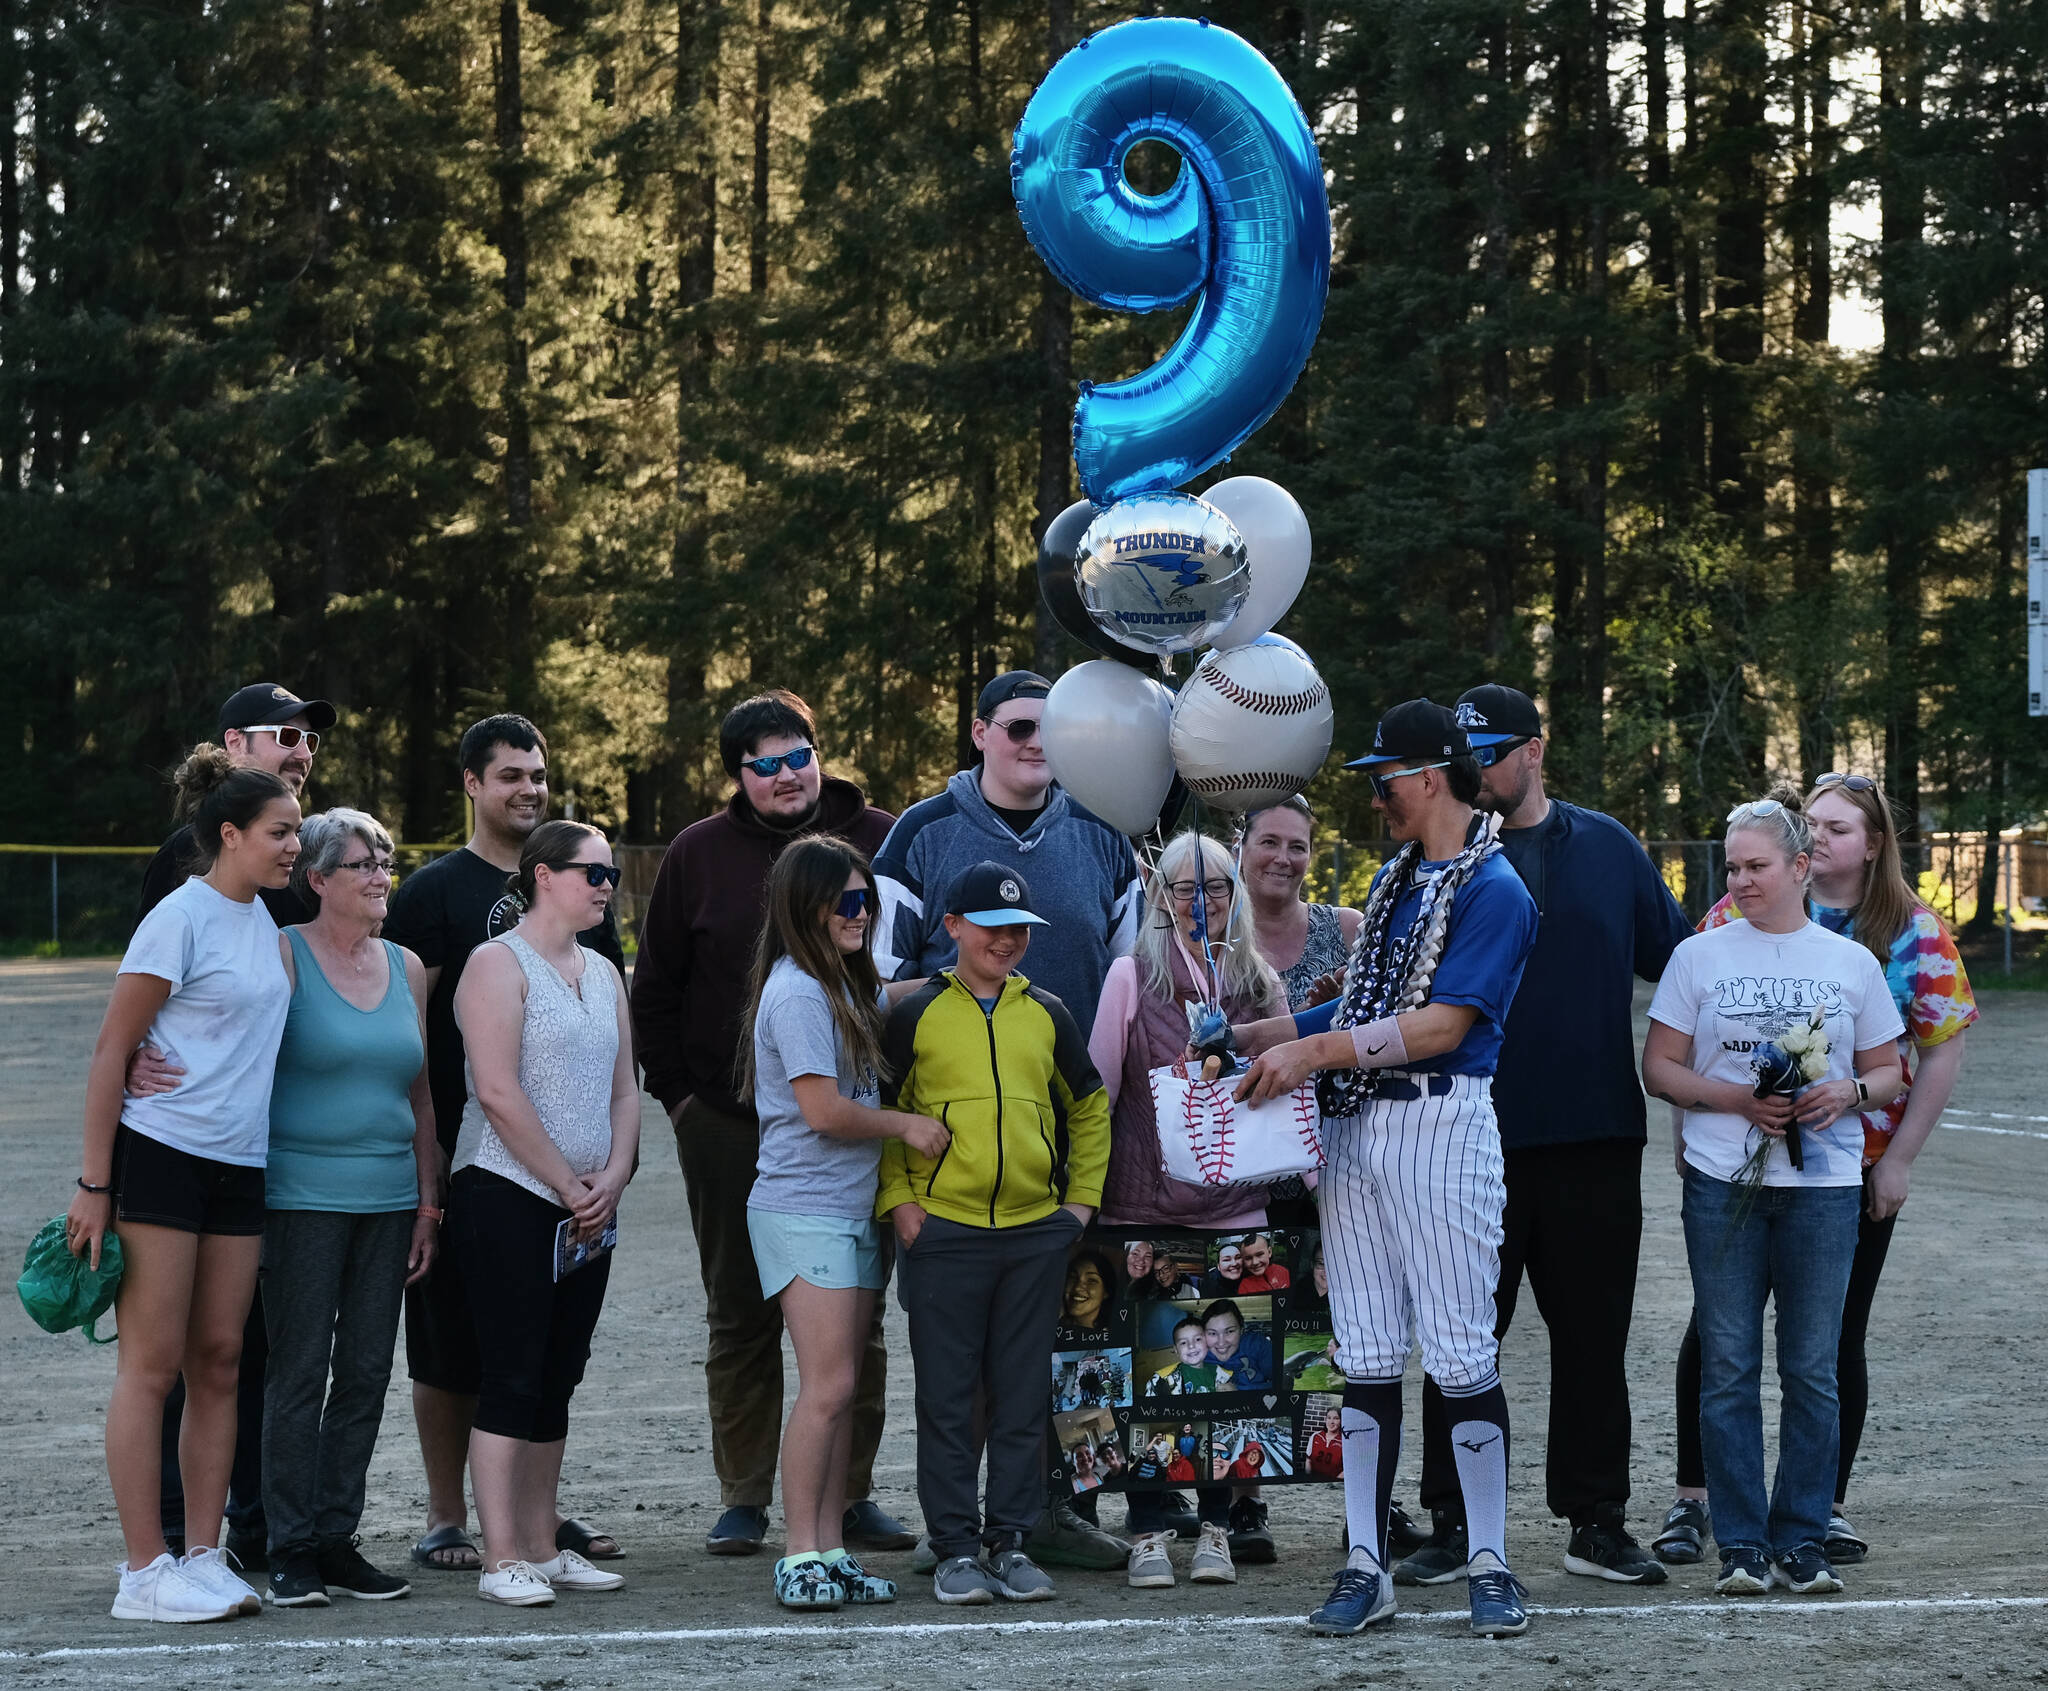 Thunder Mountain Falcons senior Rory Hayes and family were celebrated Wednesday at Adair-Kennedy Field. (Klas Stolpe / Juneau Empire)